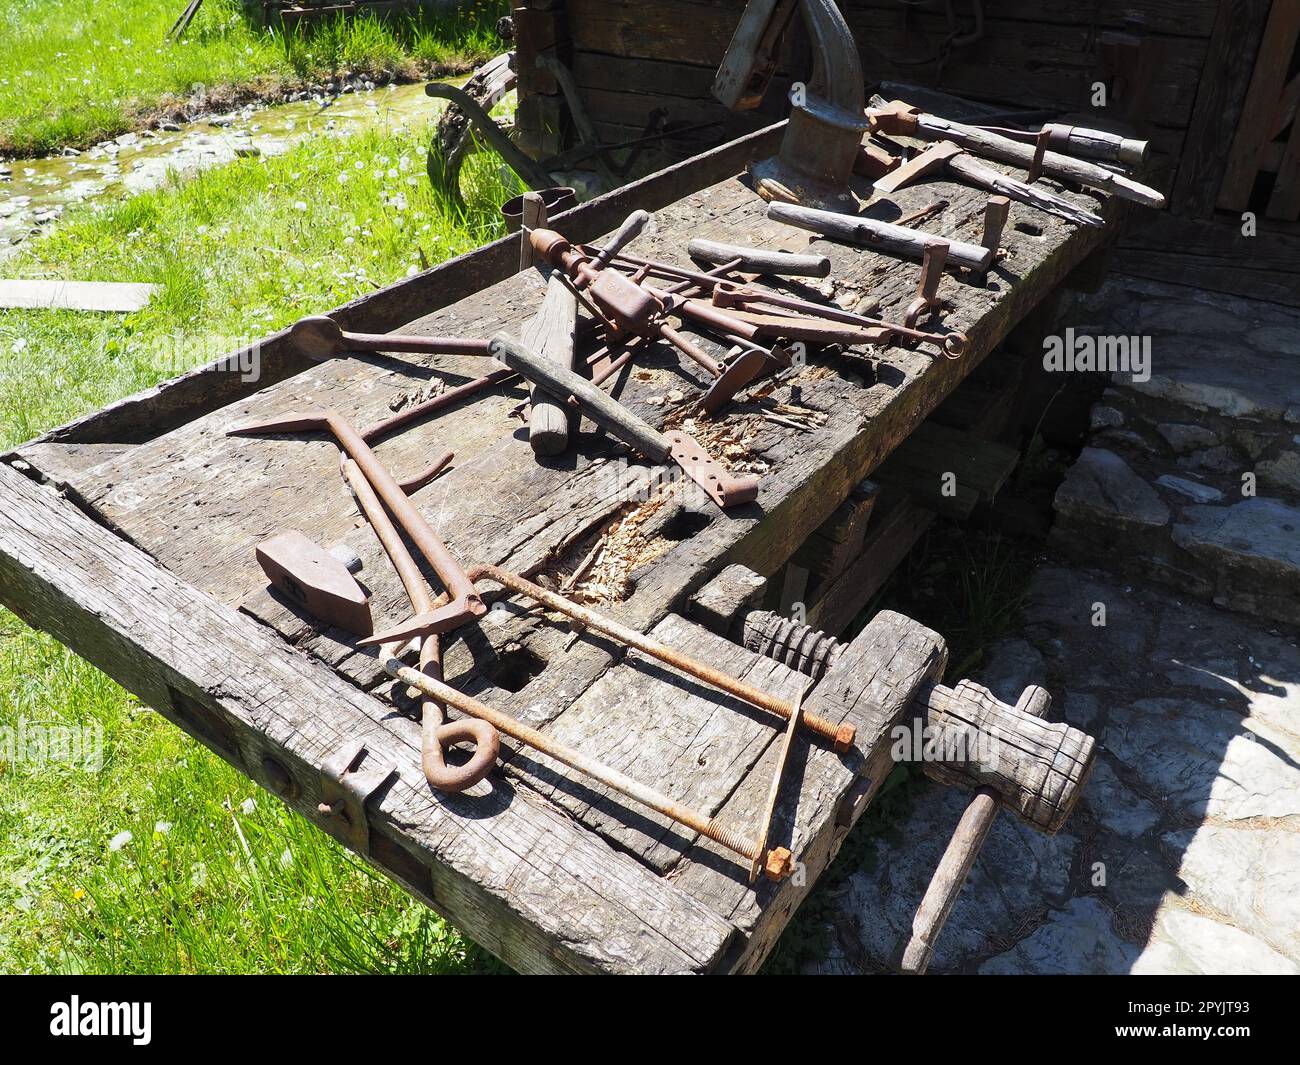 vintage working tools on a wooden table. Wooden and metal tools for building and rural life. Hammer, bracket, saw, ax, drill, tongs, poker, spoon, wooden vice. Village life. Joinery and carpentry Stock Photo